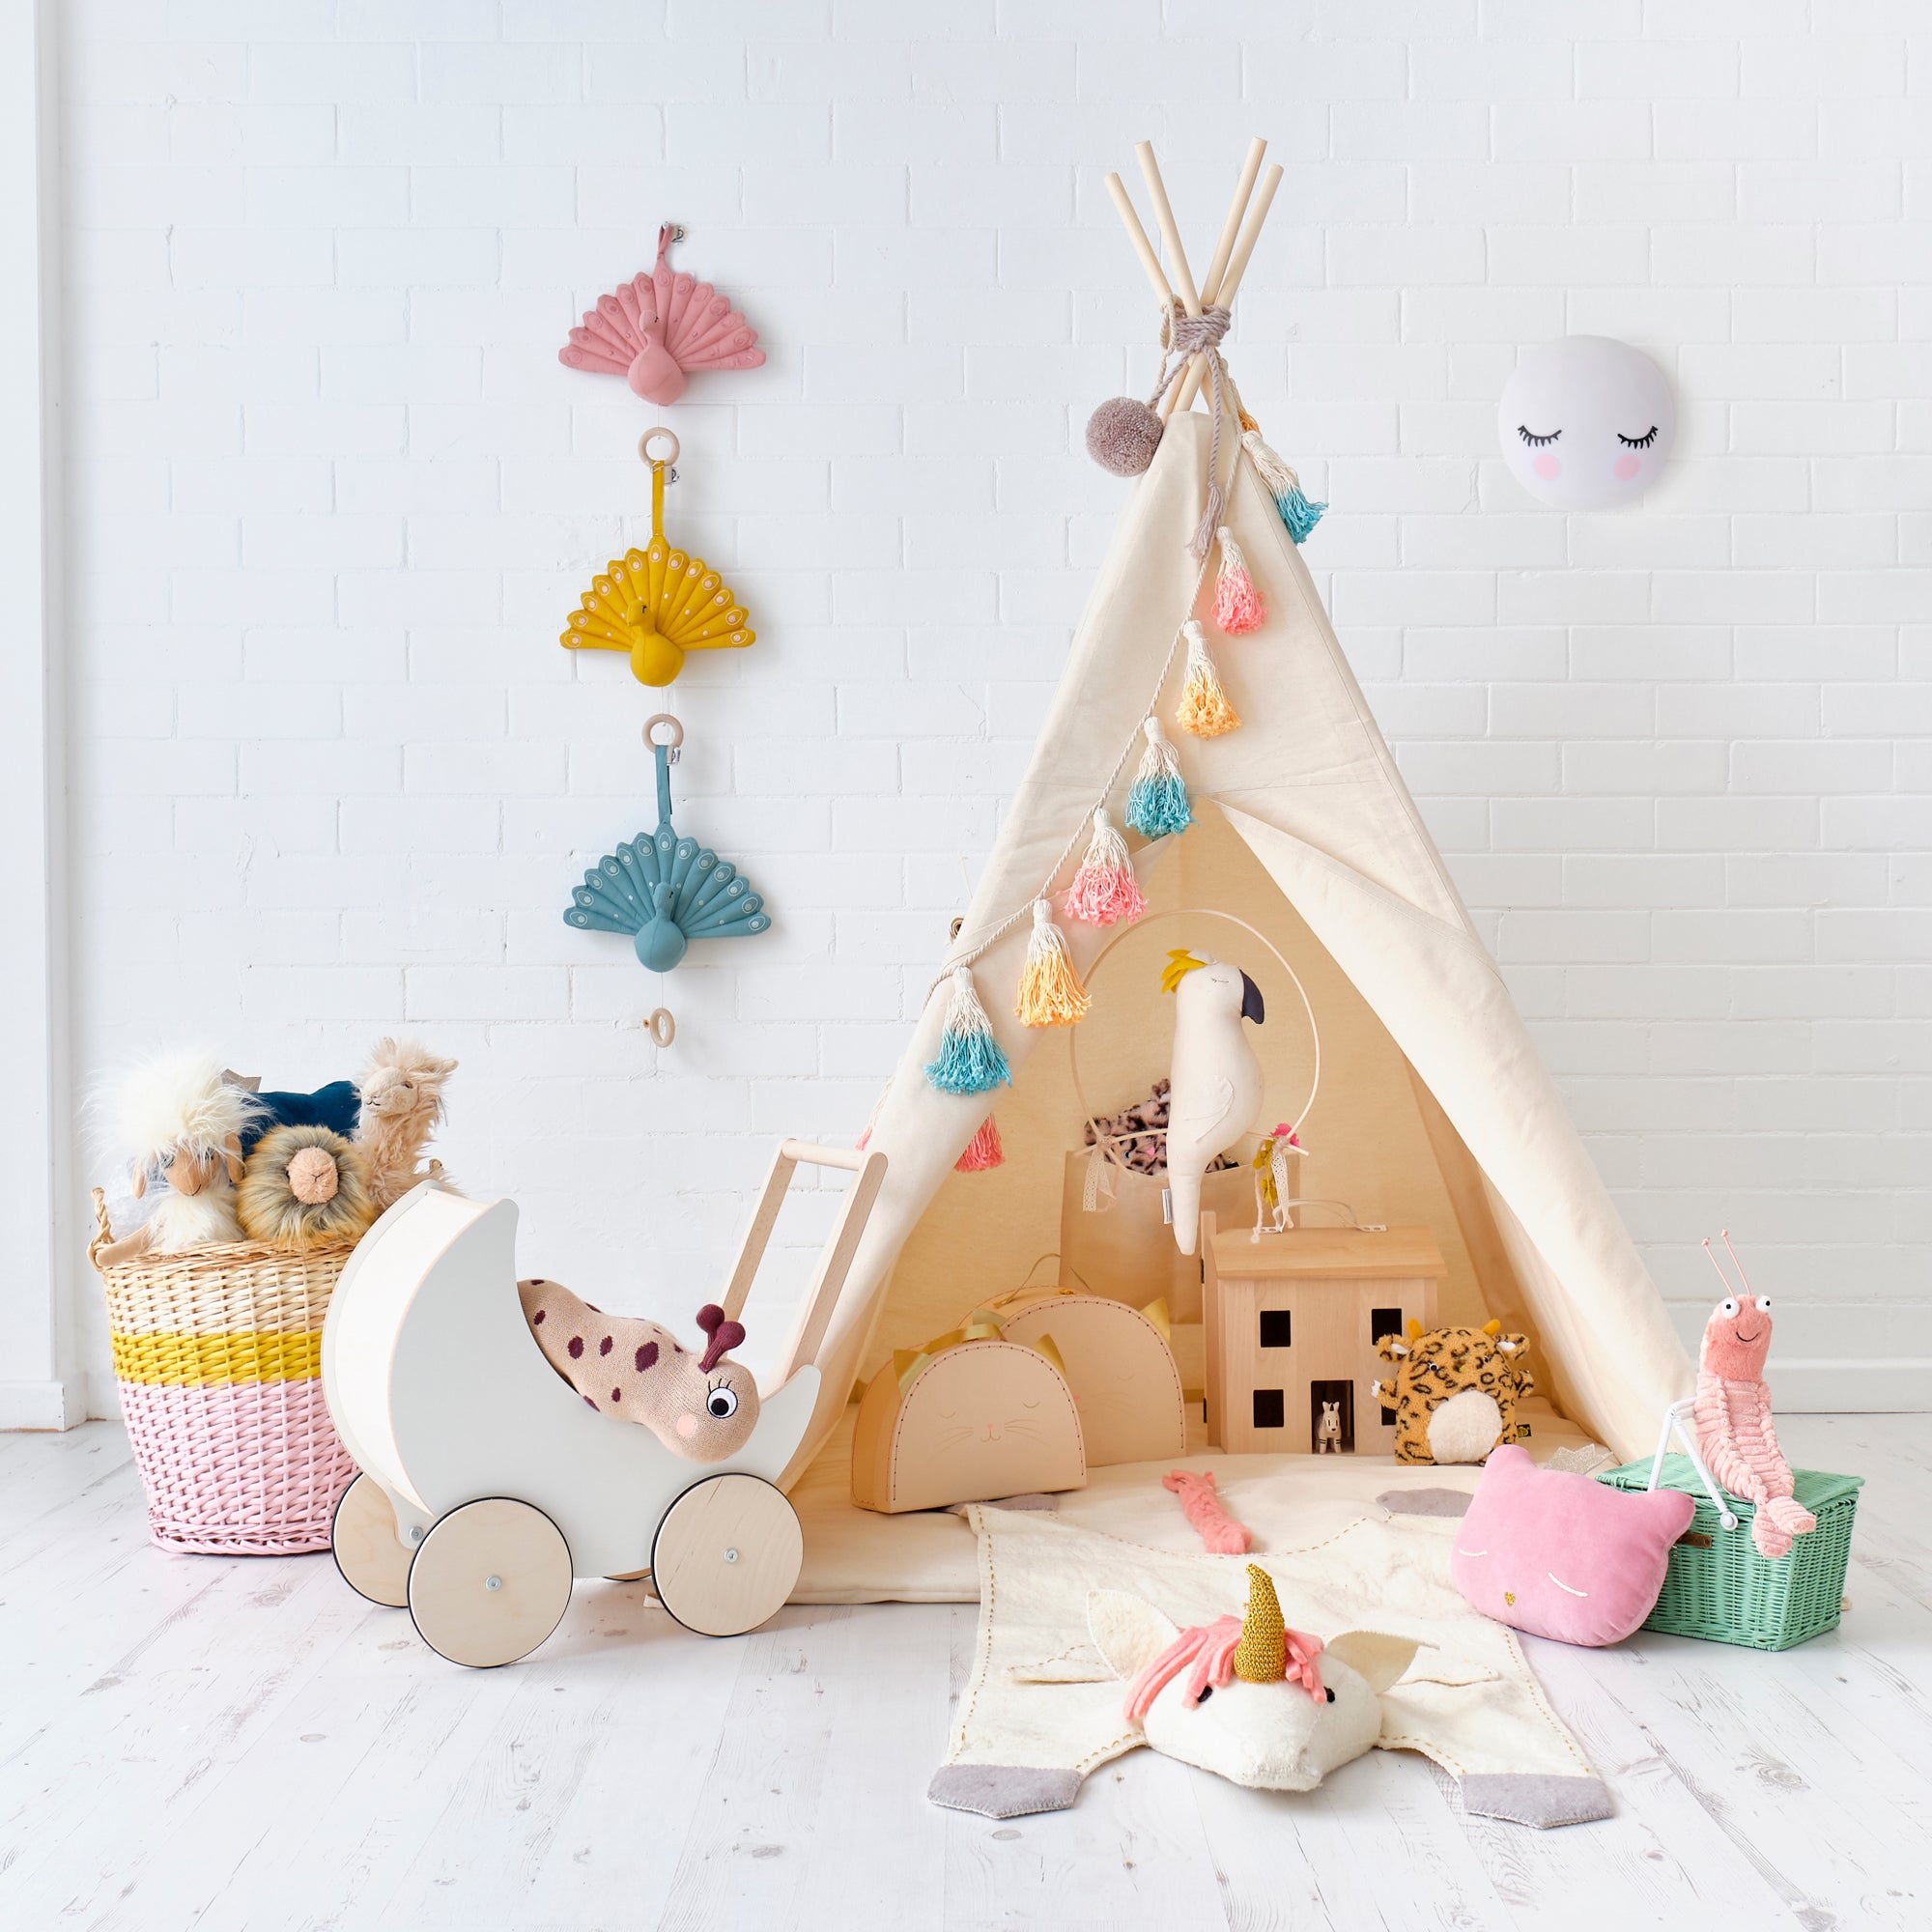 Children's Teepee Tent and Toys, by Bobby Rabbit.